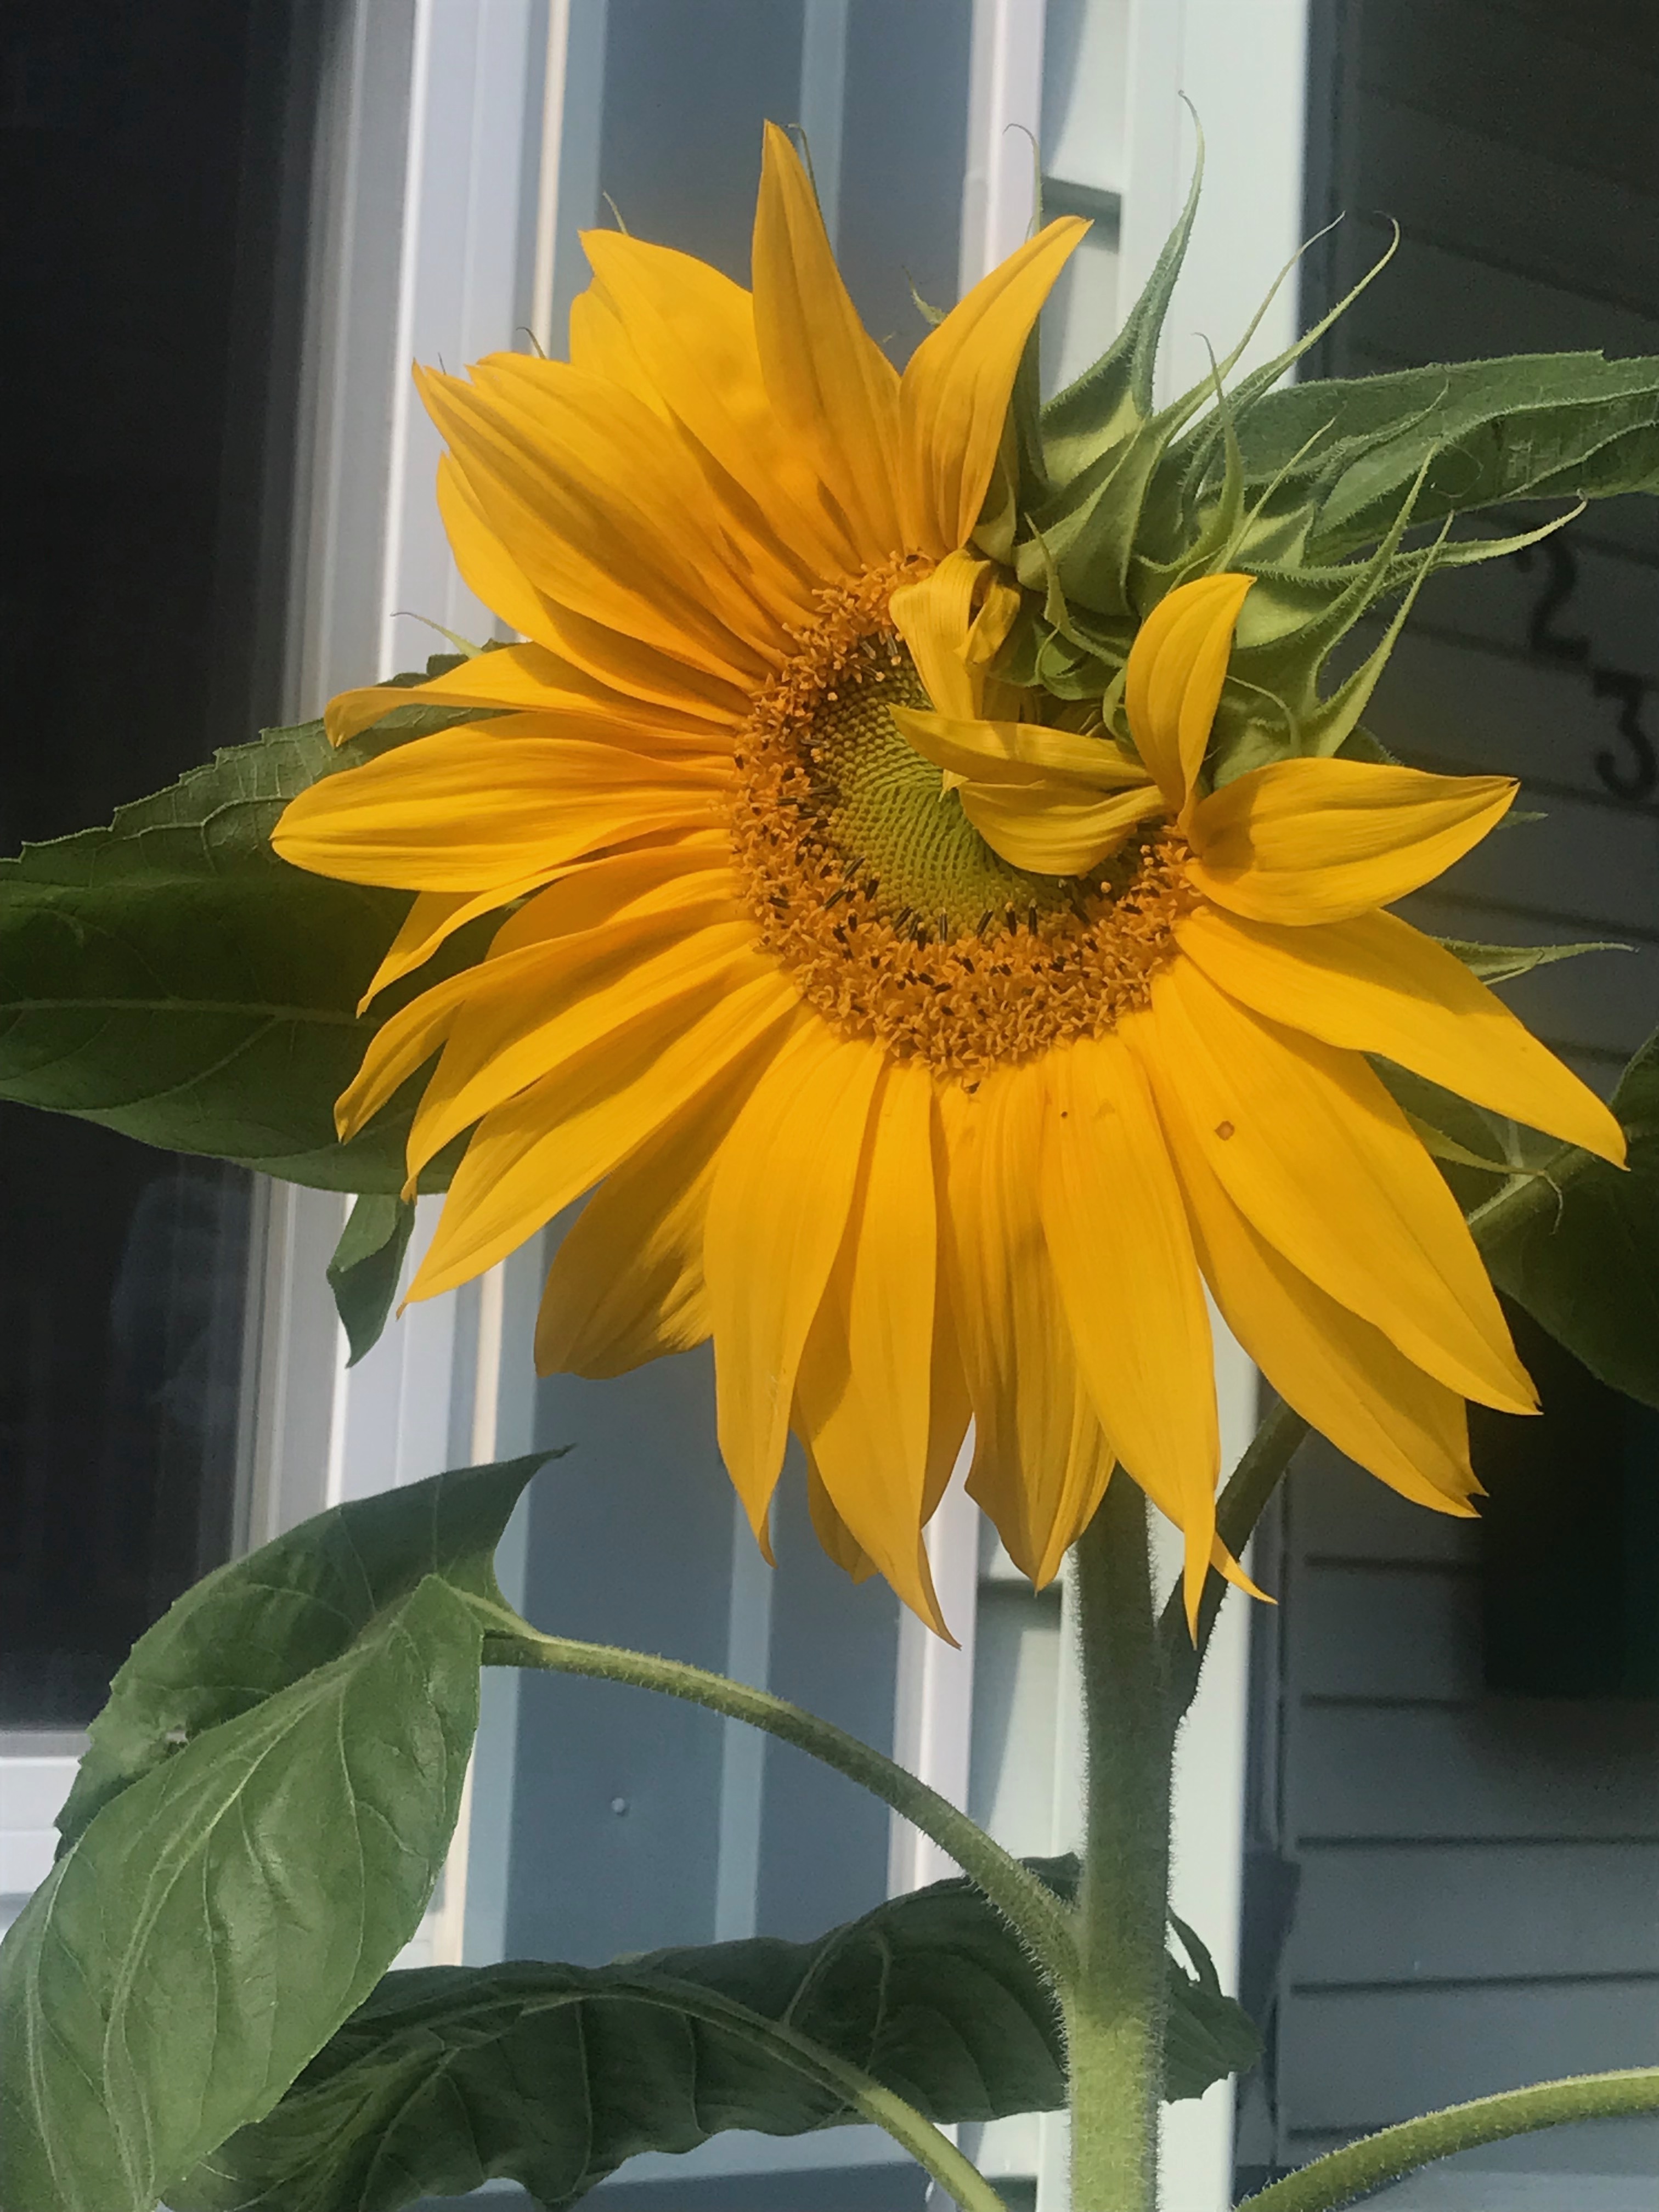 Young Sunflower winking